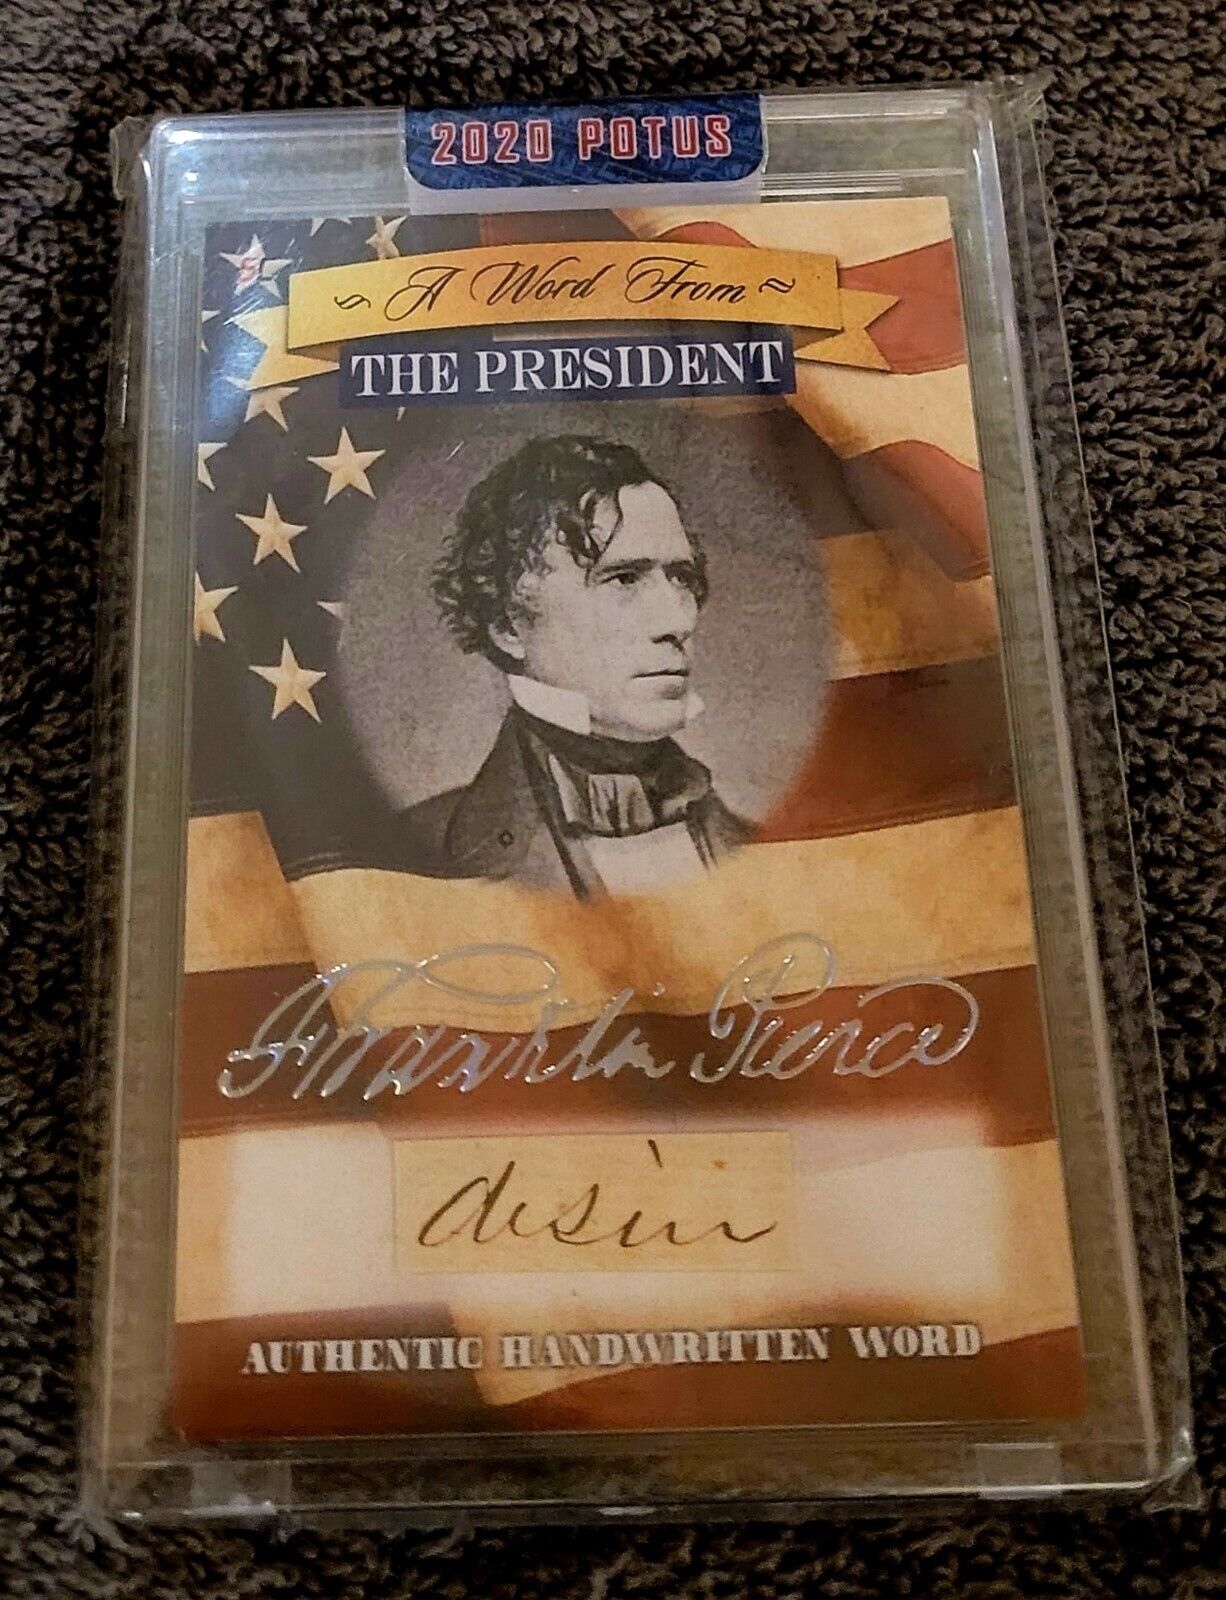 2020 POTUS WORD FROM THE PRESIDENT *Franklin Pierce* AUTHENTIC HANDWRITTEN WORD